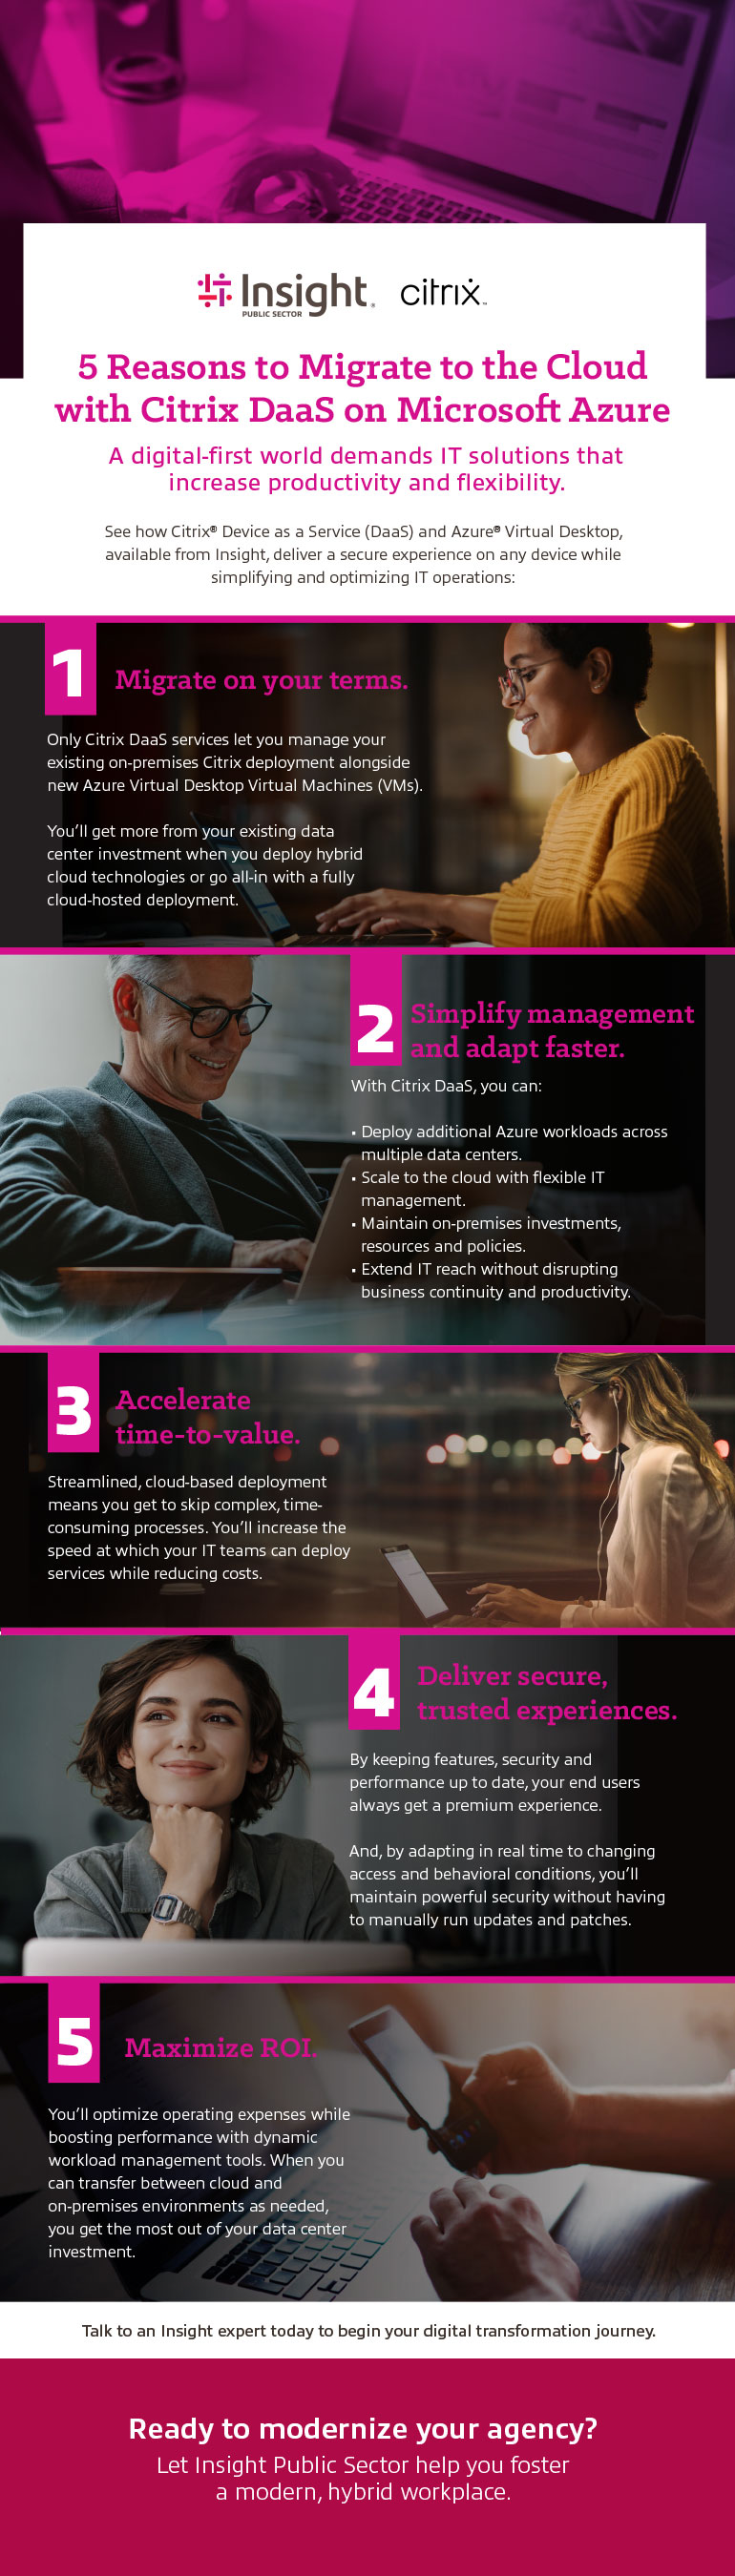 5 Reasons to Migrate to the Cloud with Citrix DaaS on Microsoft Azure infographic translated below